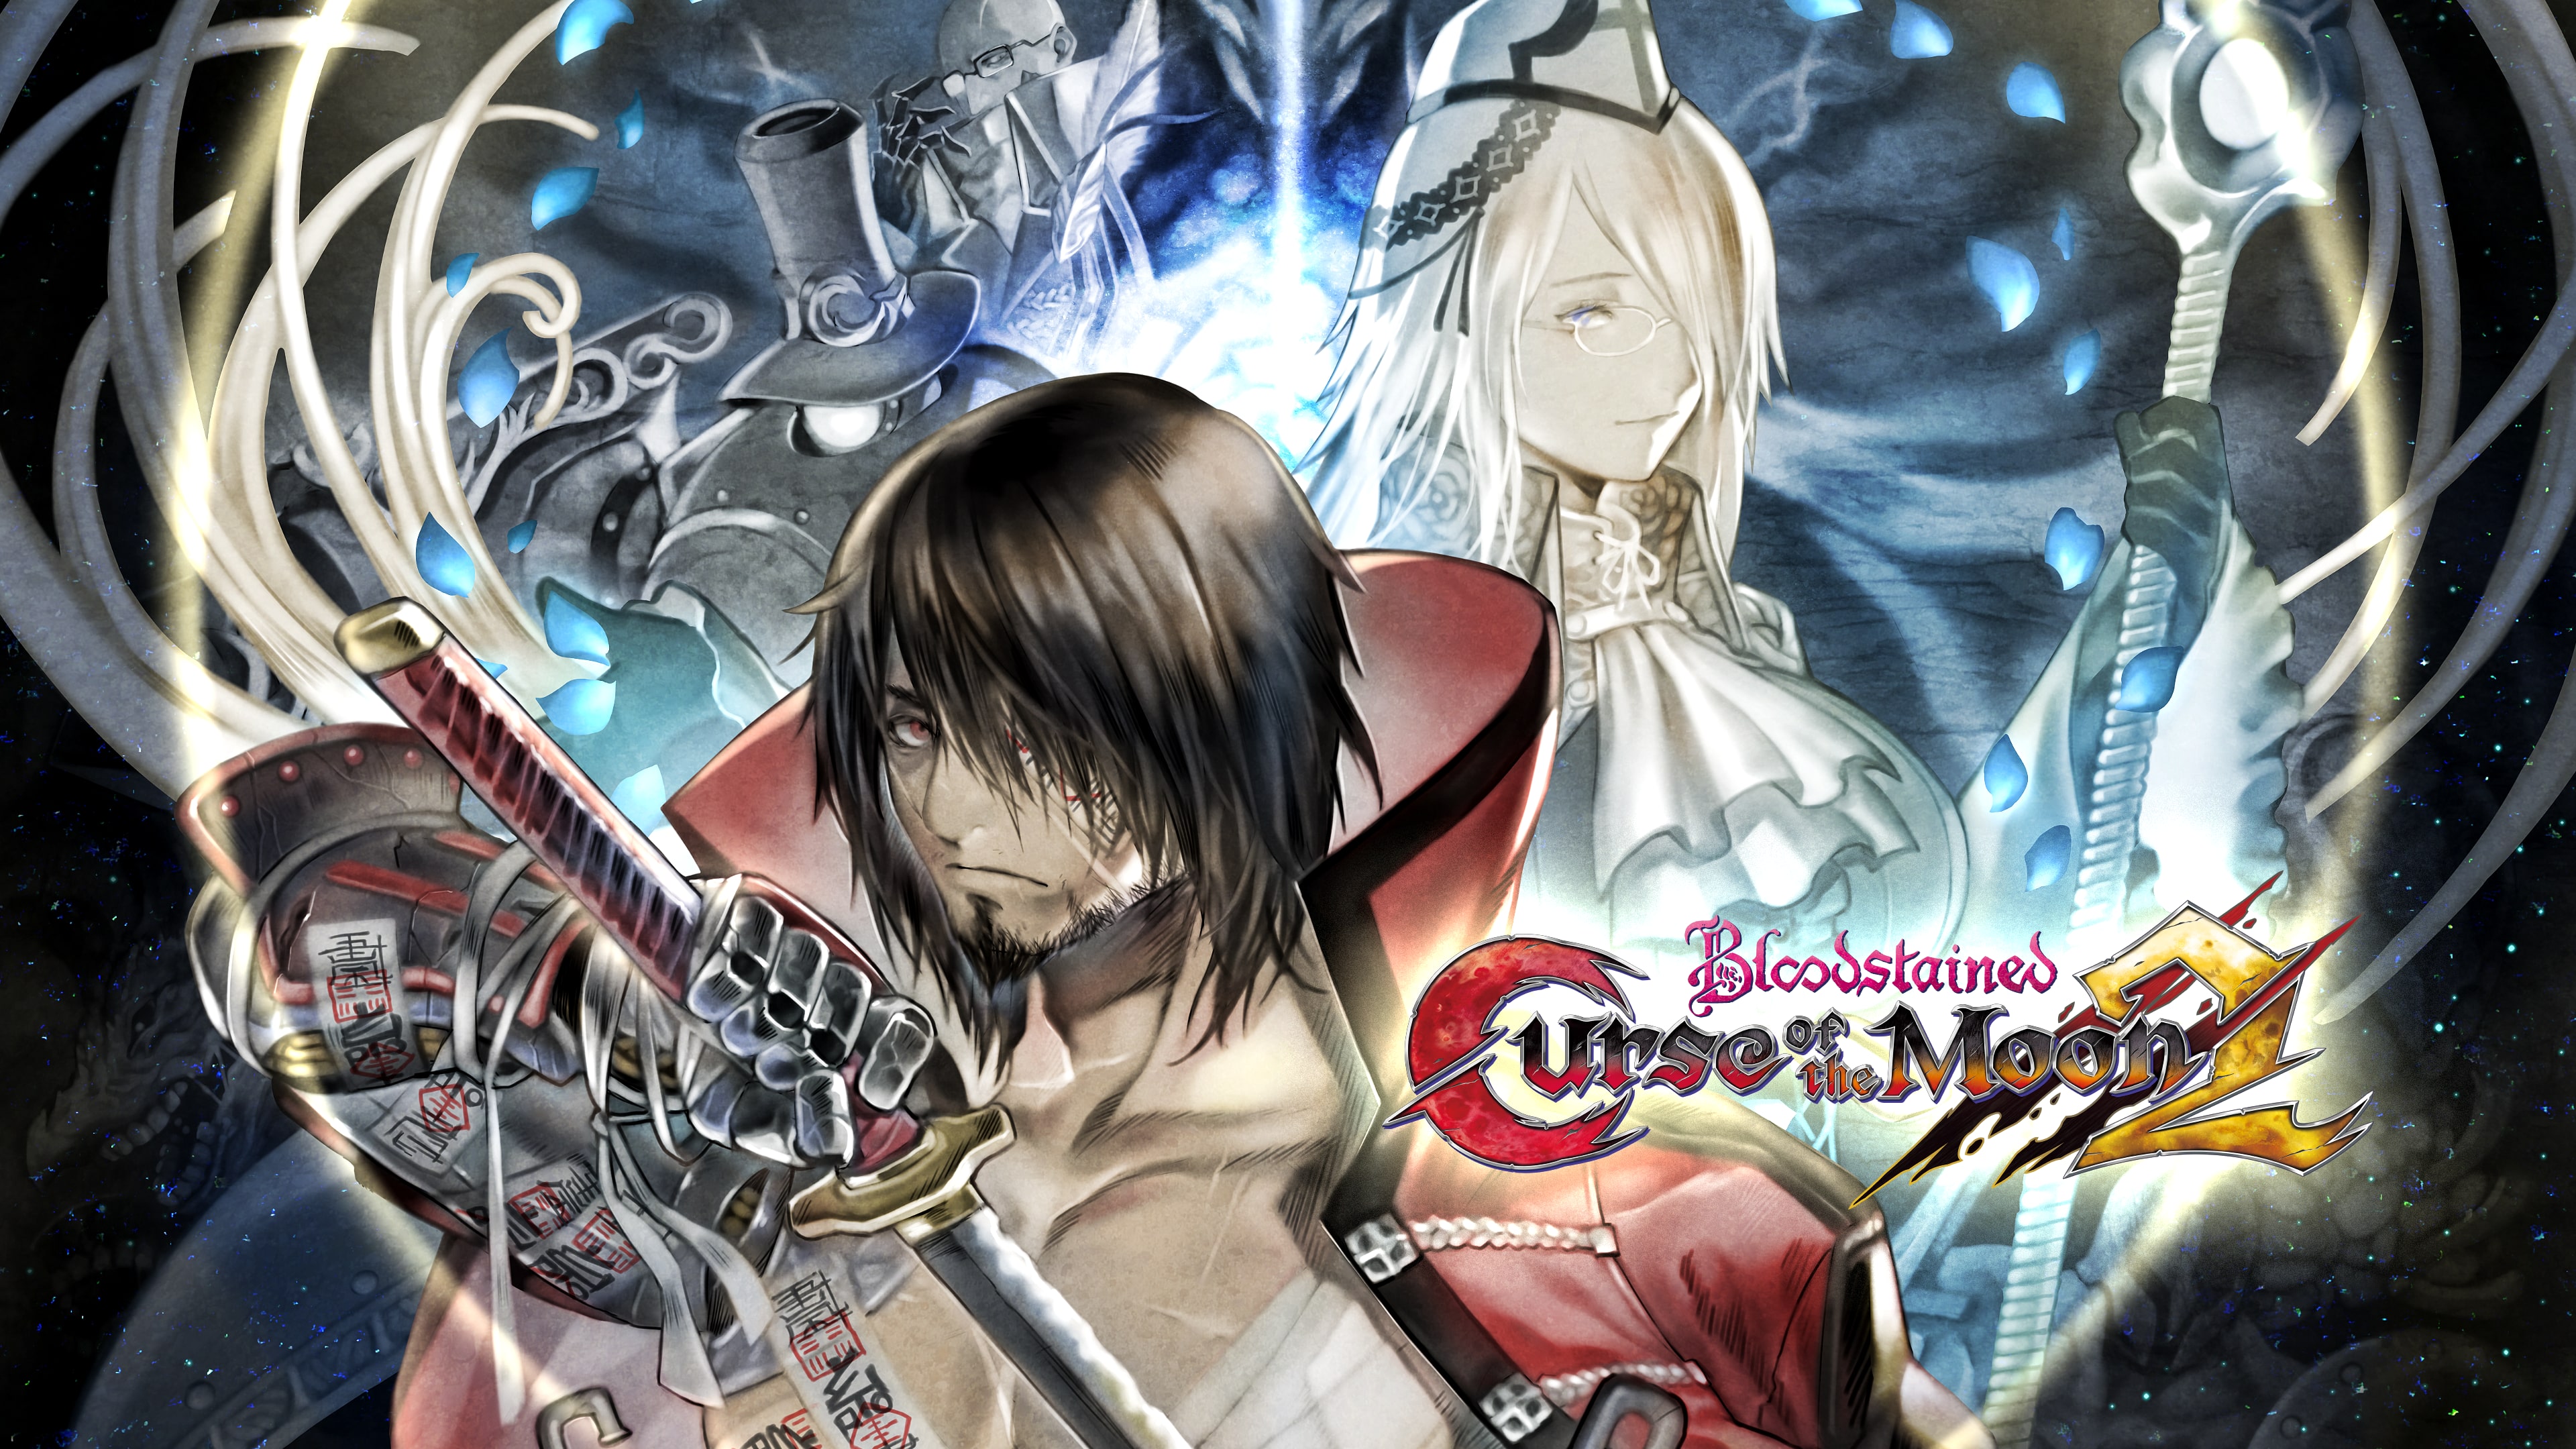 Bloodstained: Curse of the Moon 2 (English, Japanese)